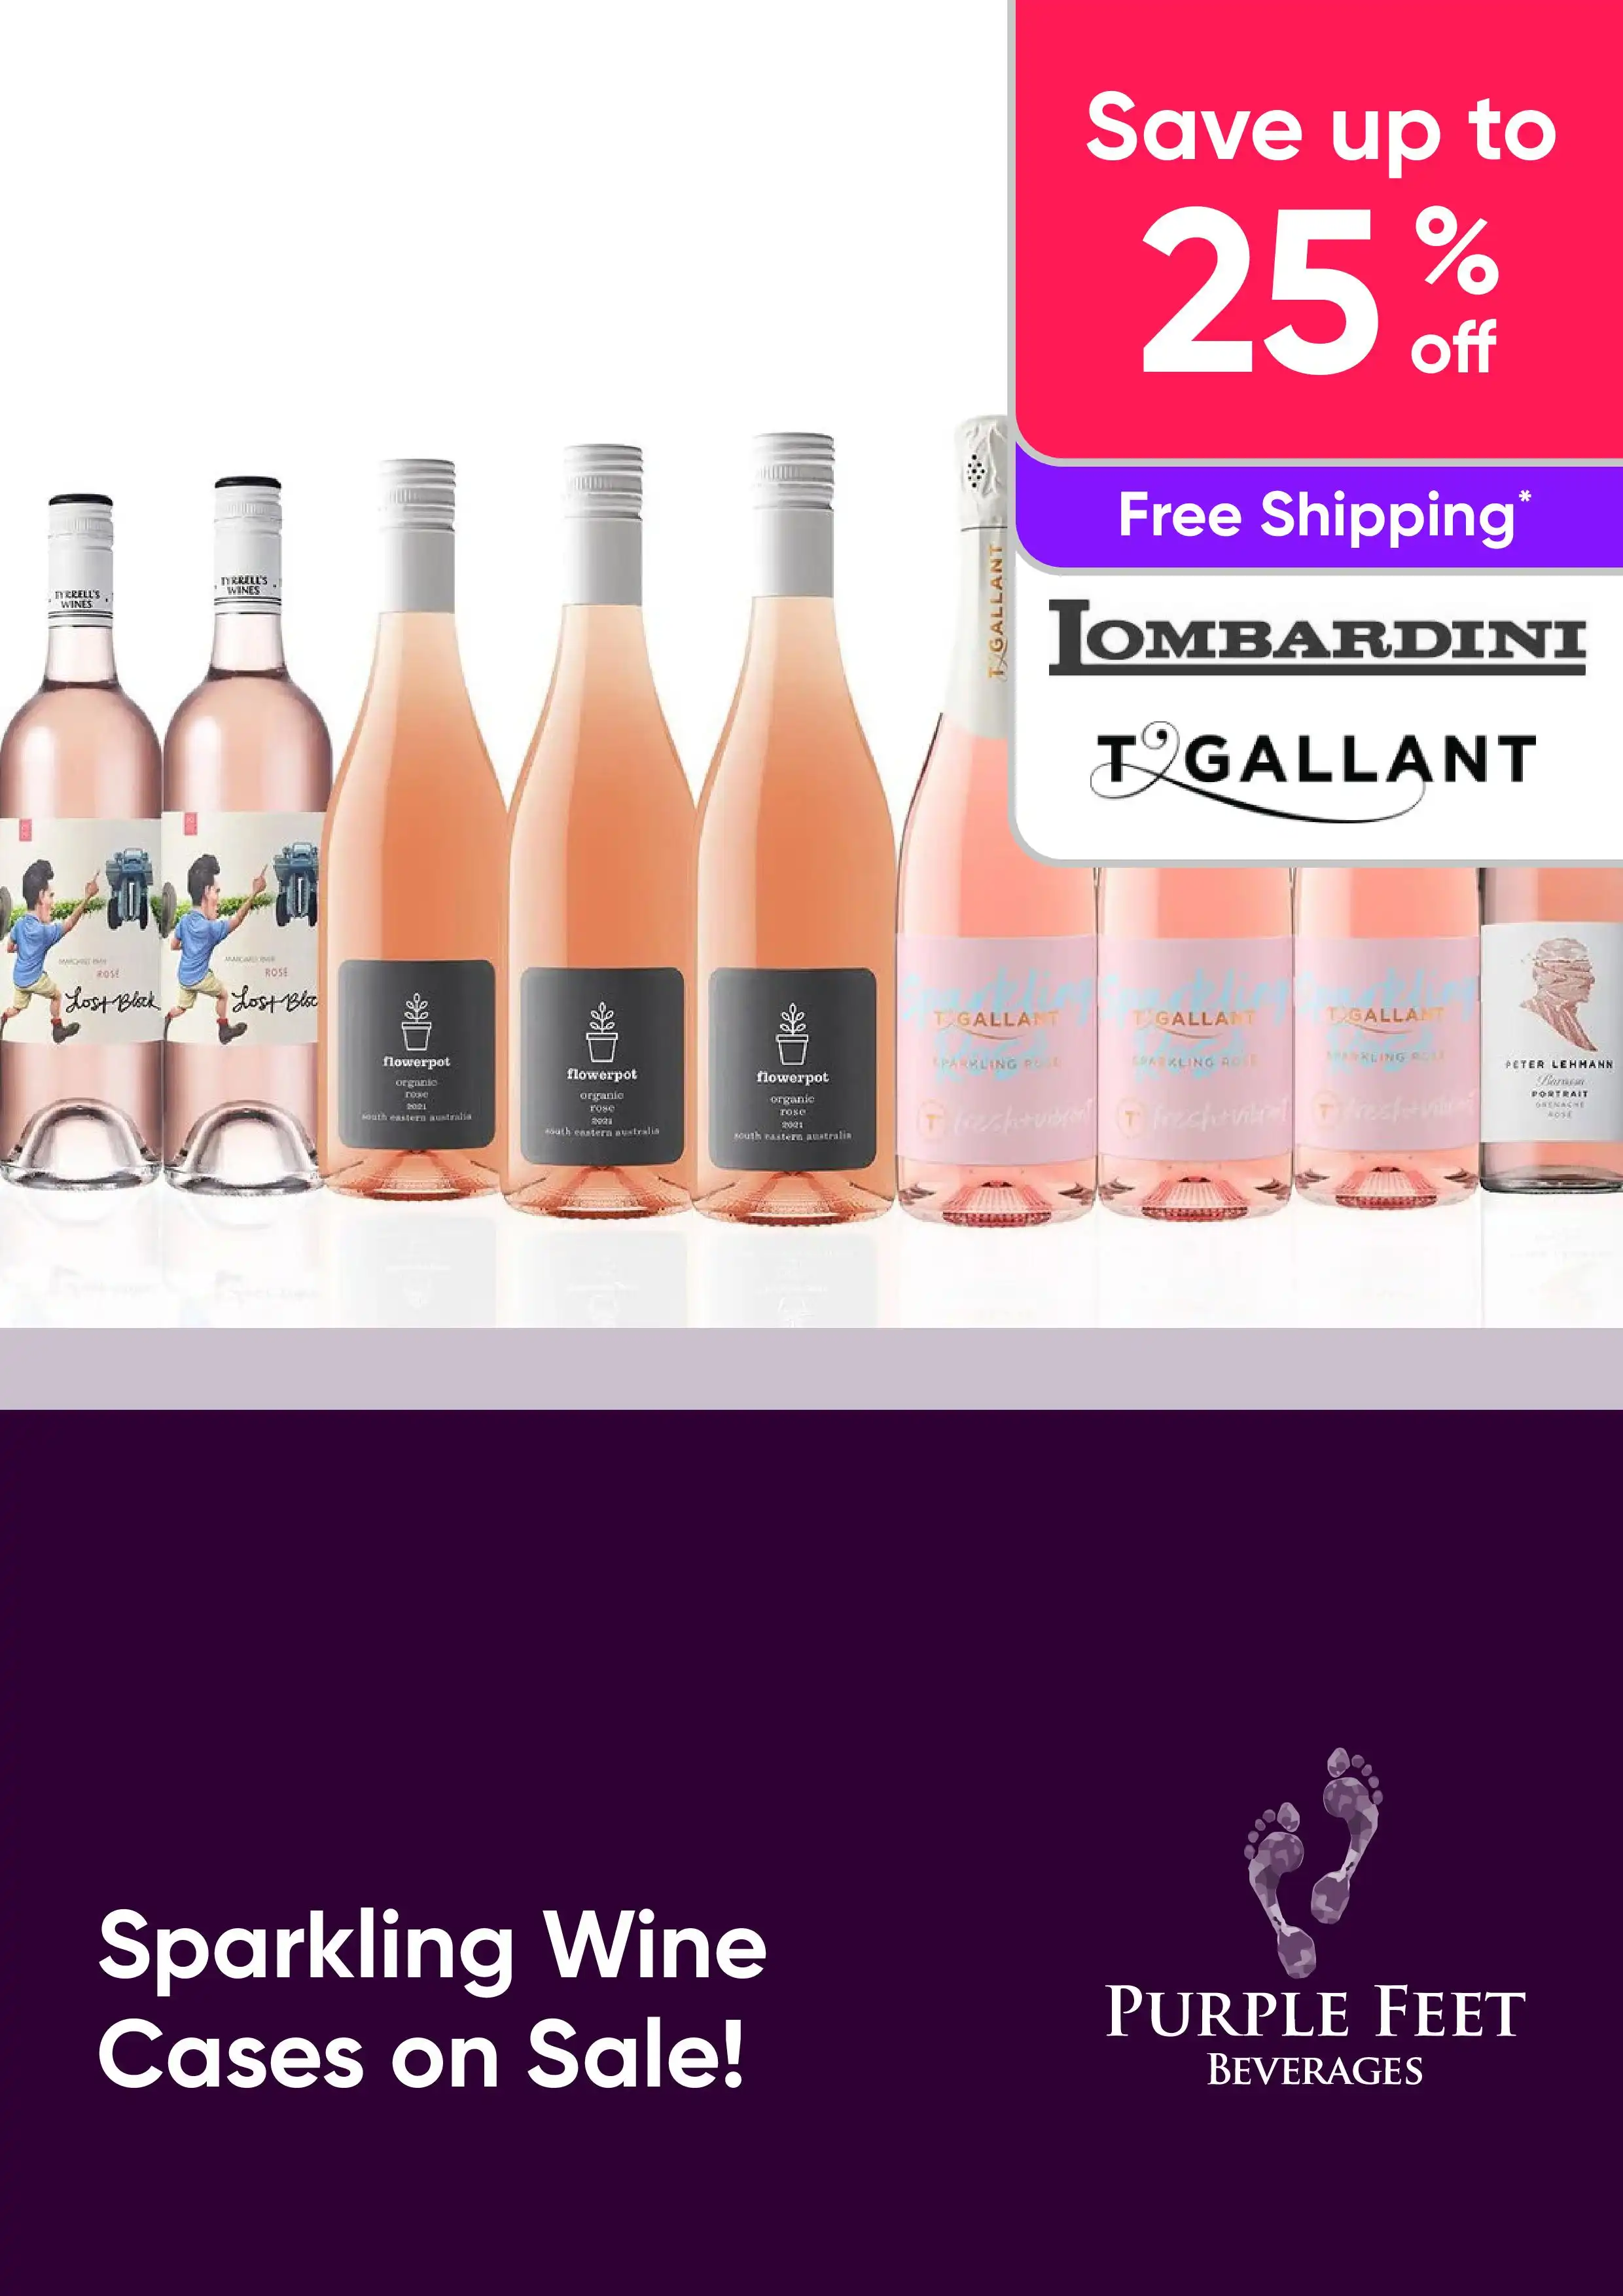 Sparkling Wine Cases on Sale! -  Cantina Lombardini, T'Gallant - Save up to 25%